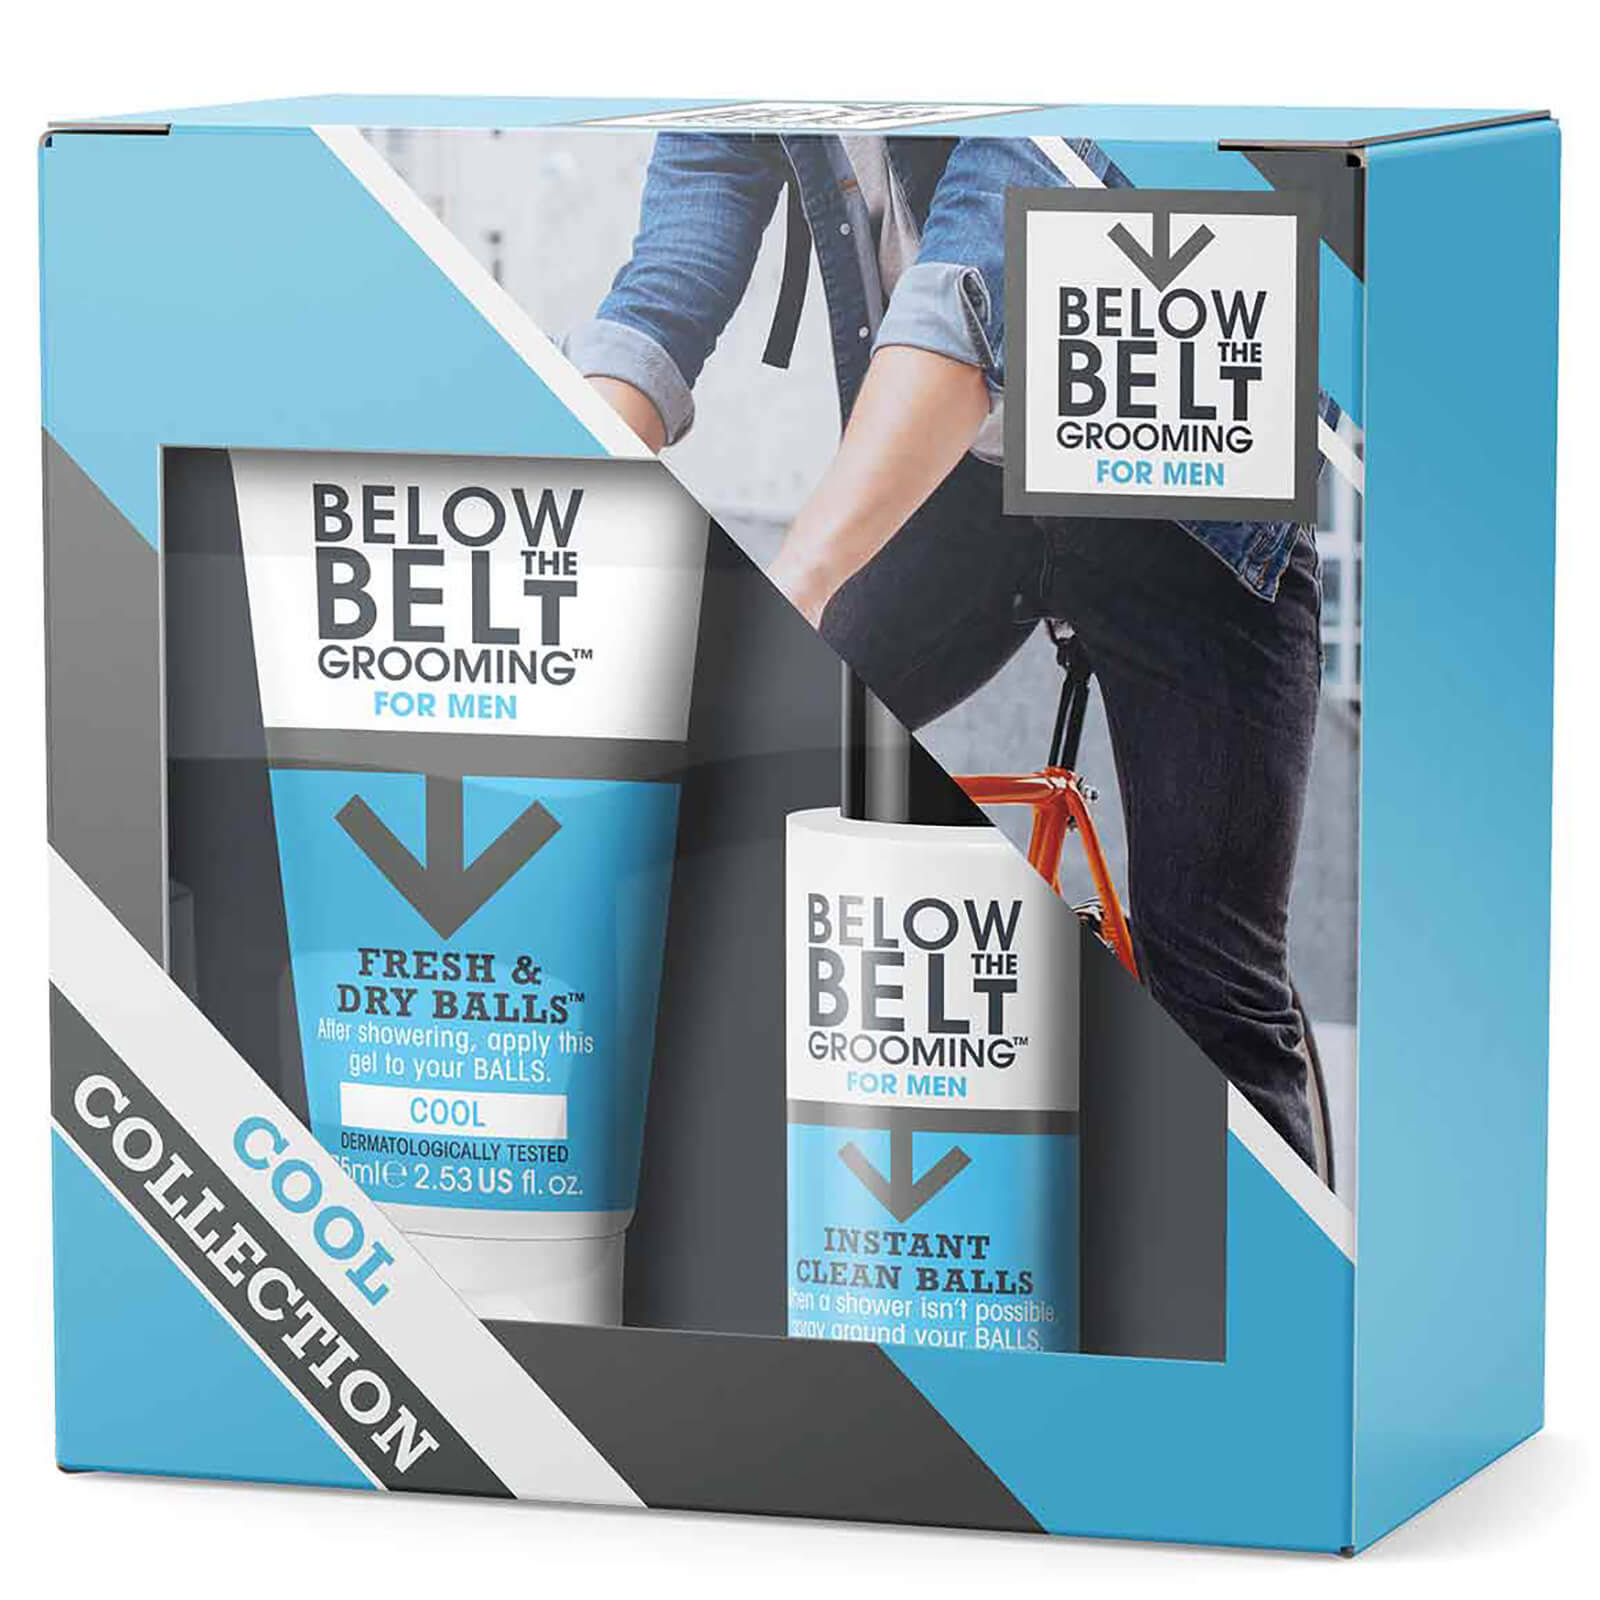 Below the Belt Grooming Gift Box - The Cool Collection